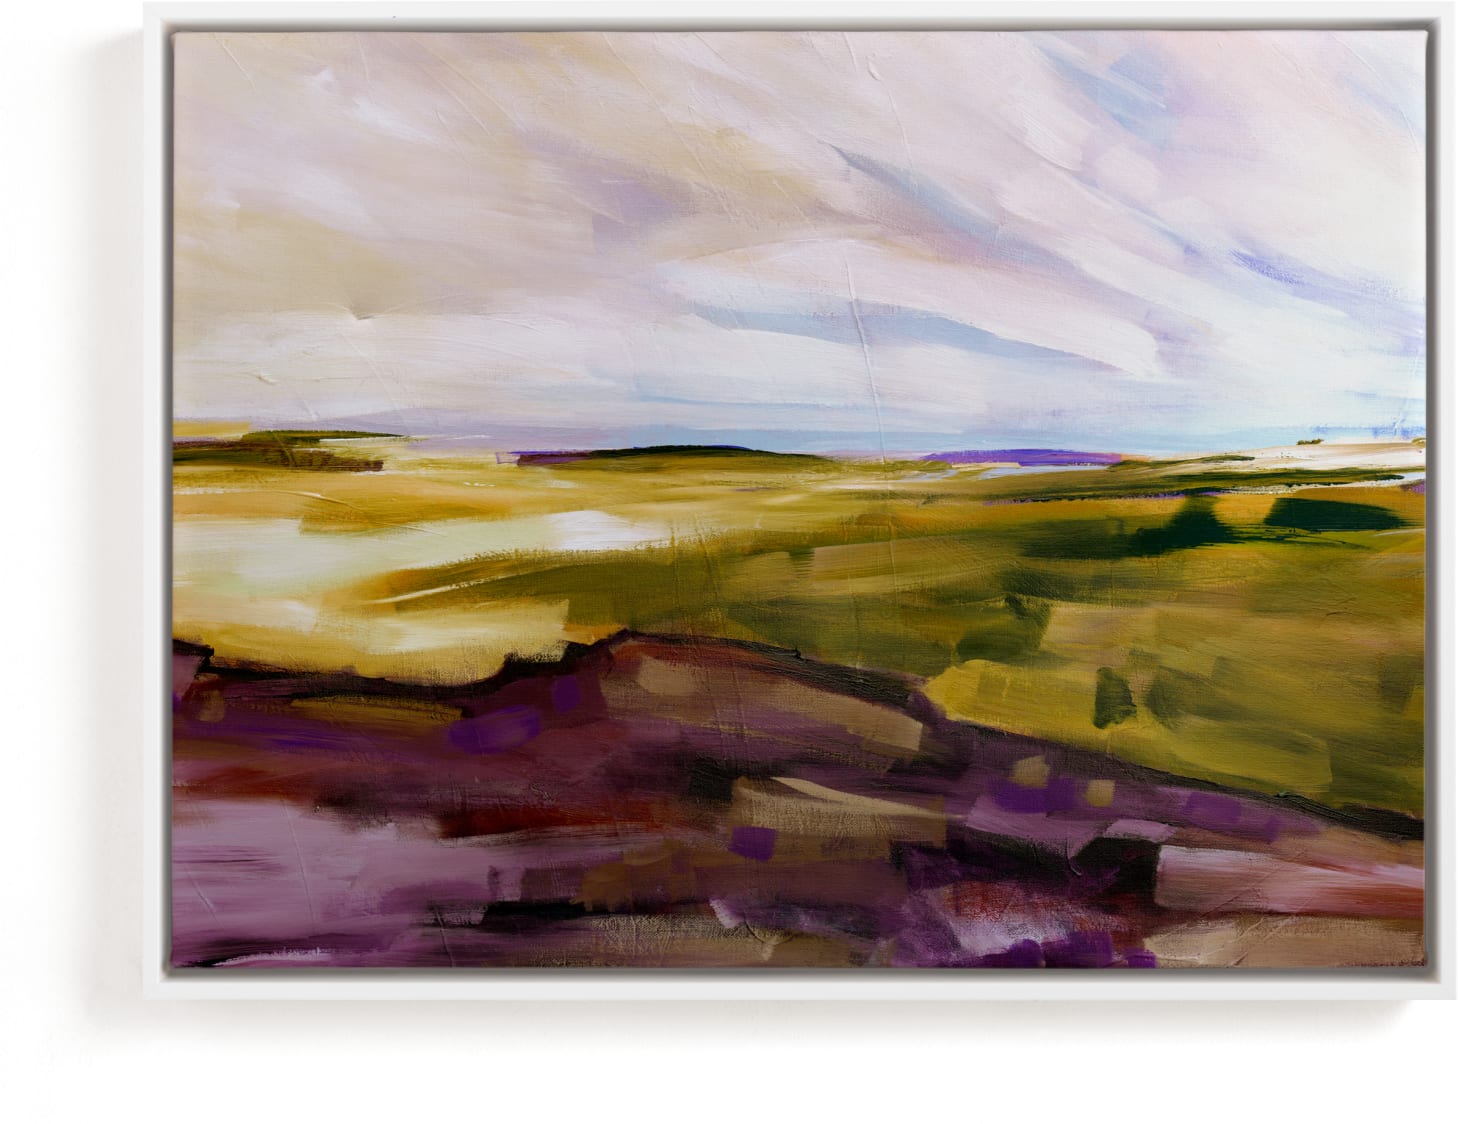 This is a purple art by Jen Florentine called Land View.